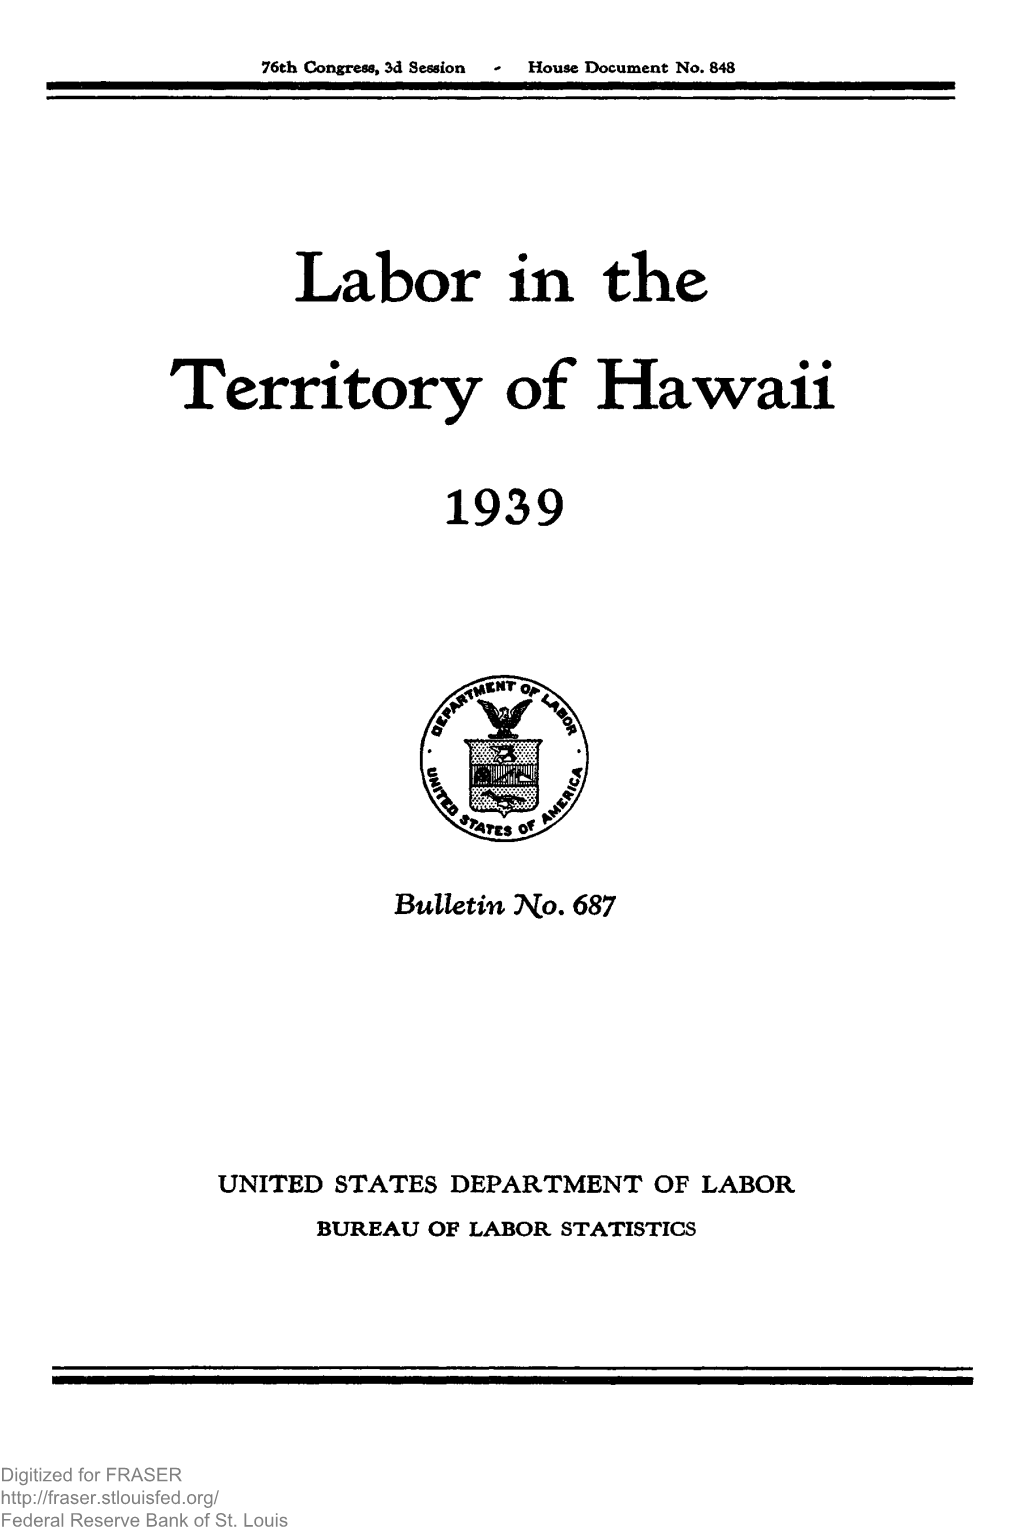 Labor in the Territory of Hawaii, 1939